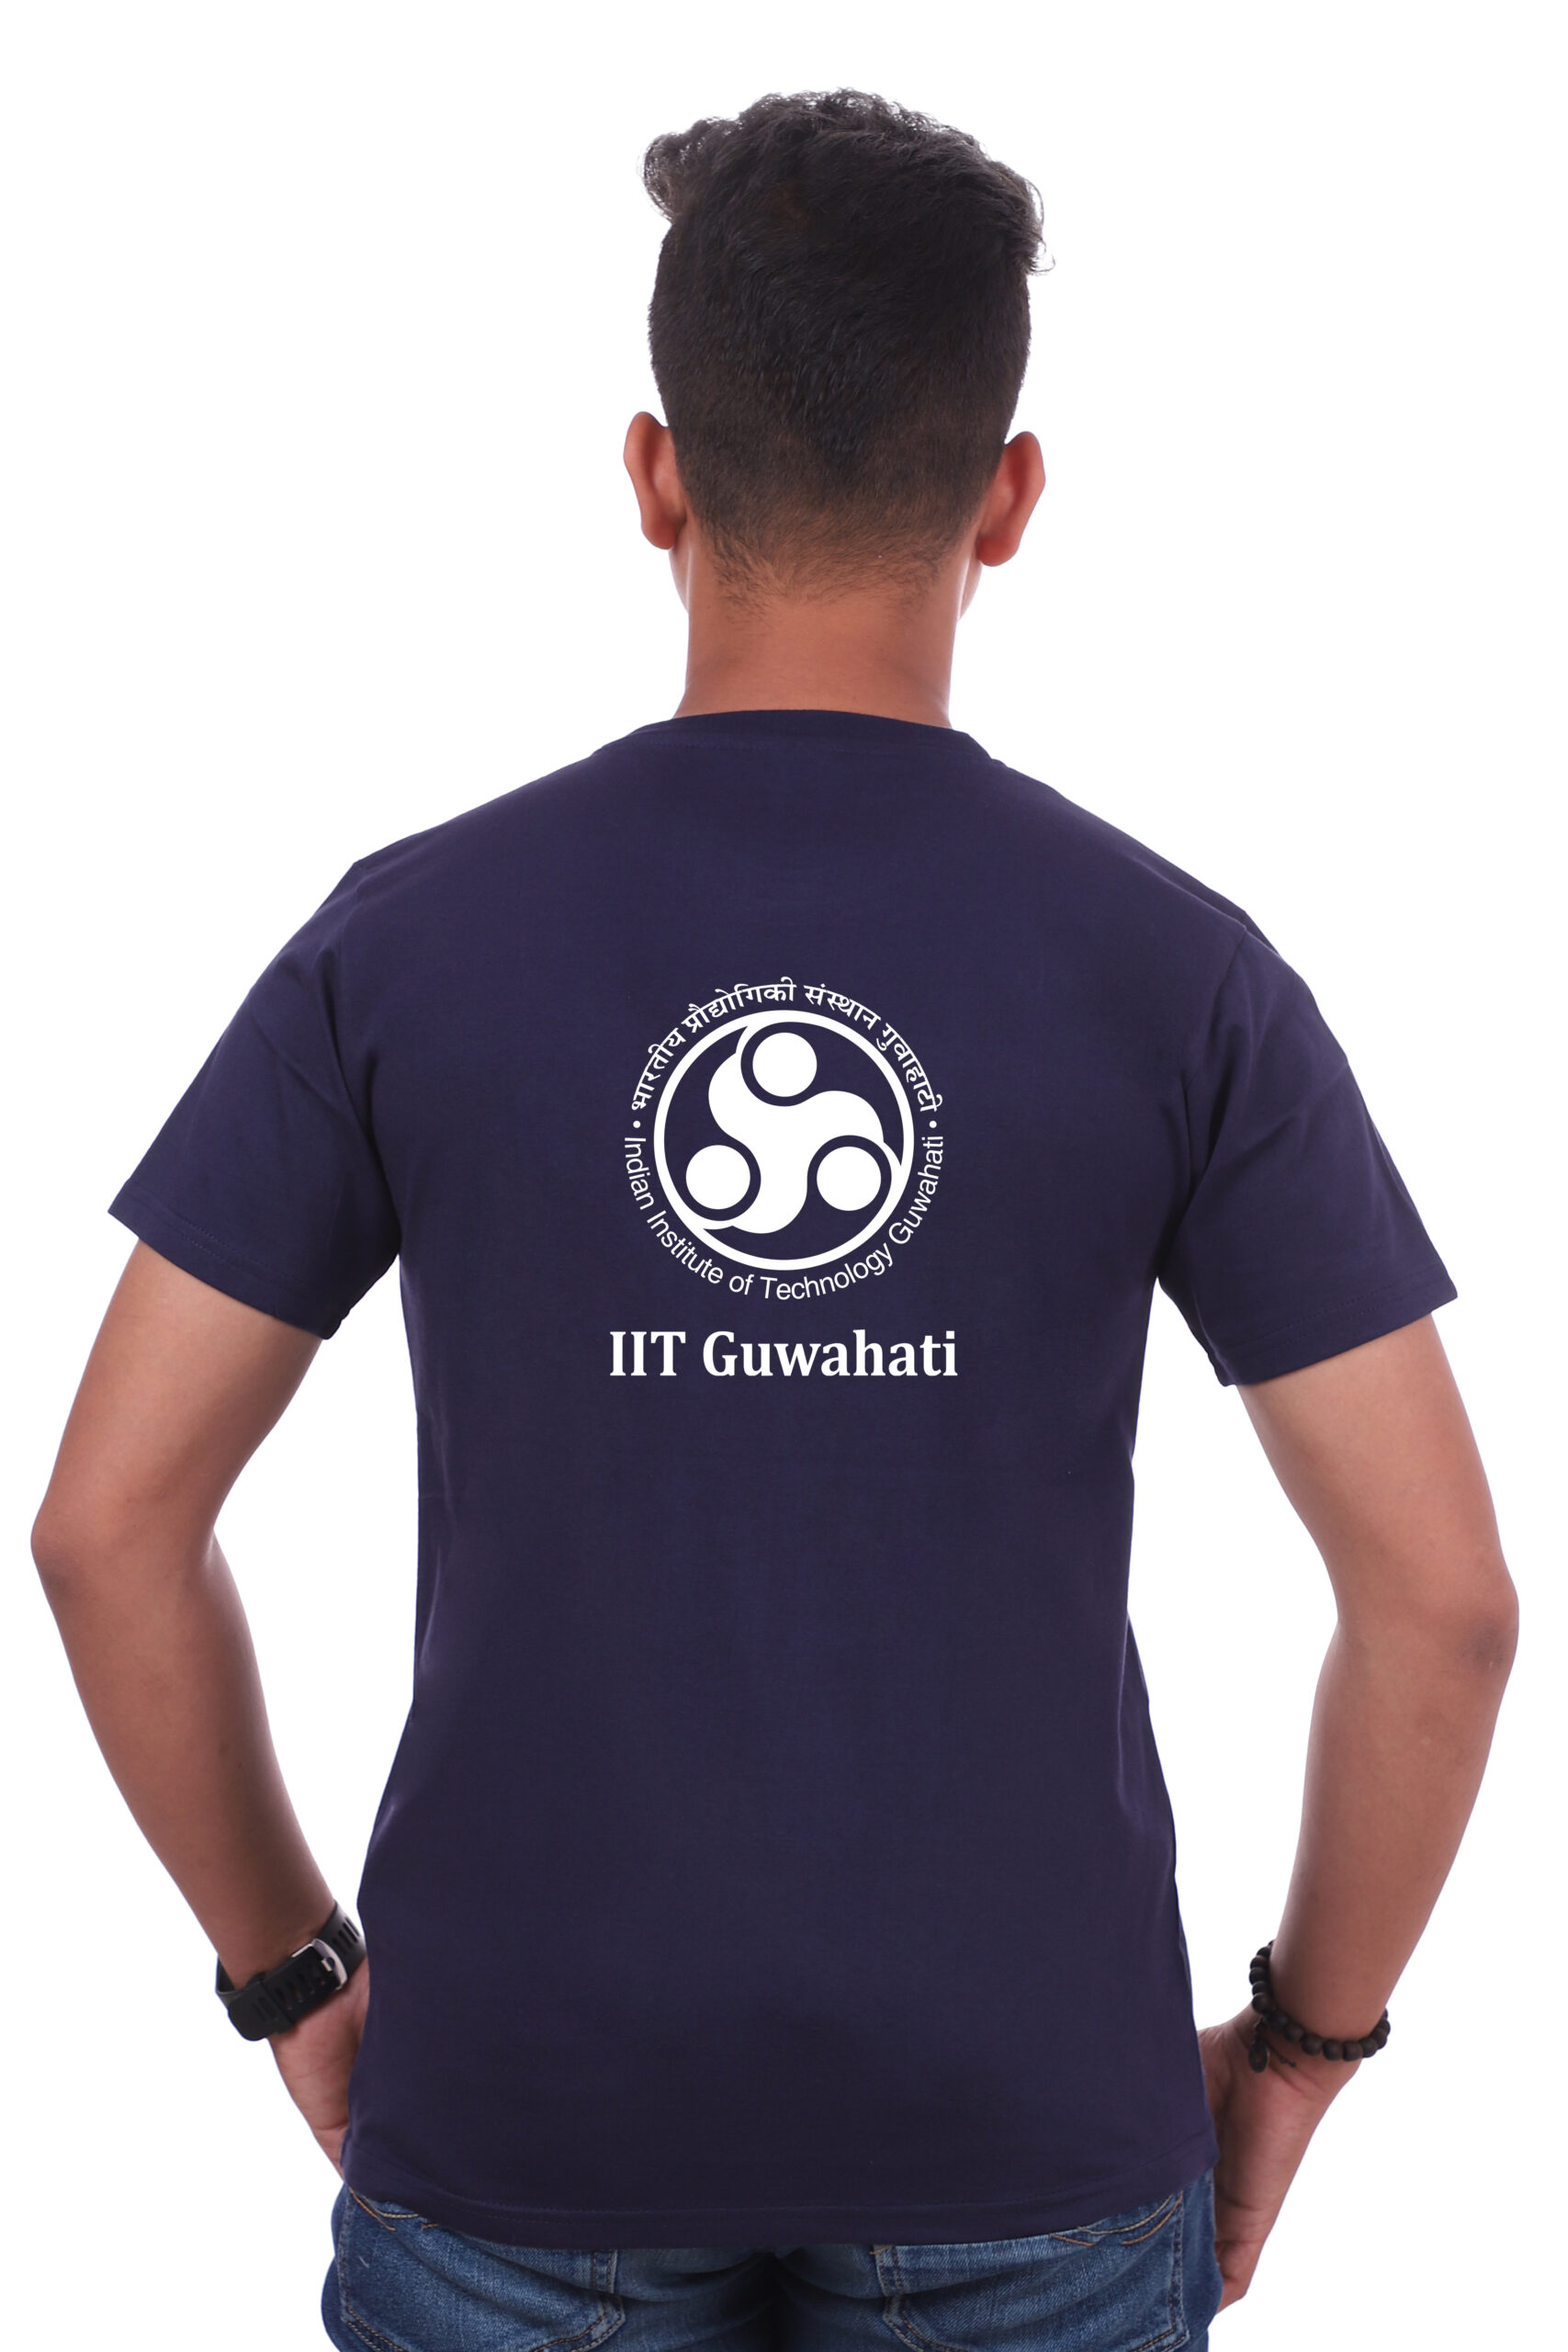 Best Ever Quoted Graphics T-shirt With IIT Guwahati Logo - AlwaysIITian